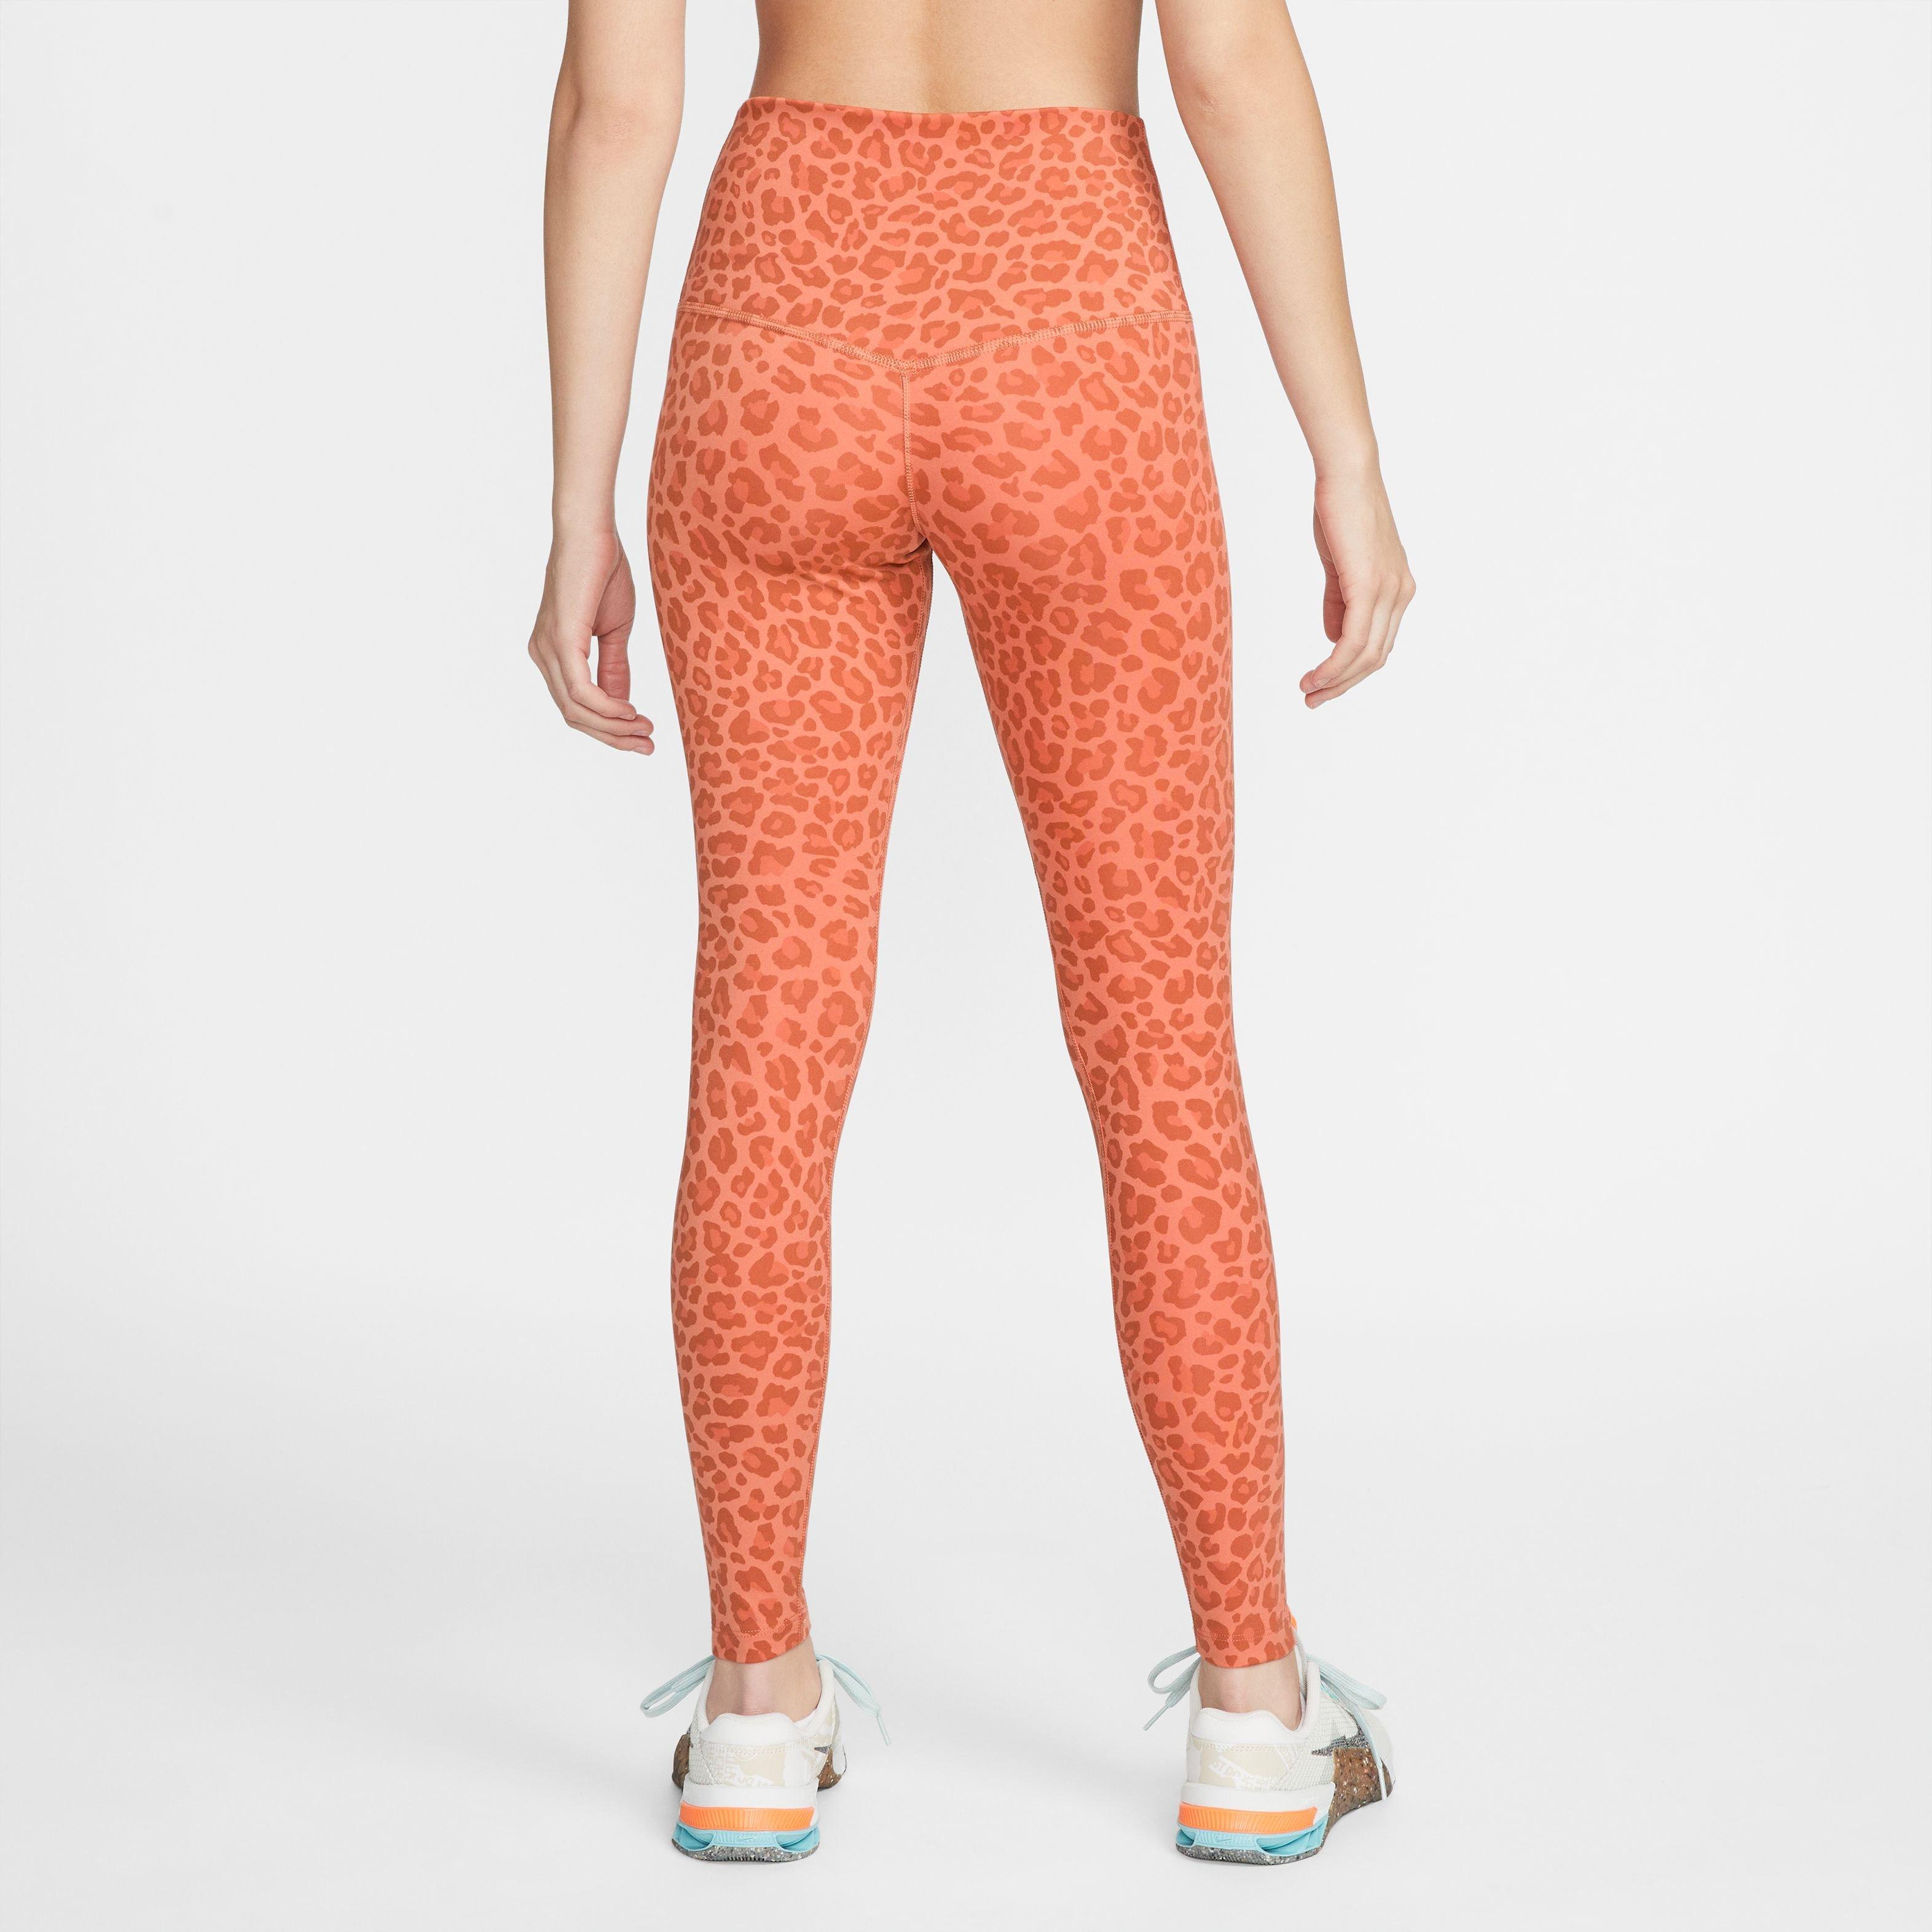 The Nike One Tight Fit Women's 7/8 Leopard Print Training Tights CK3072-010